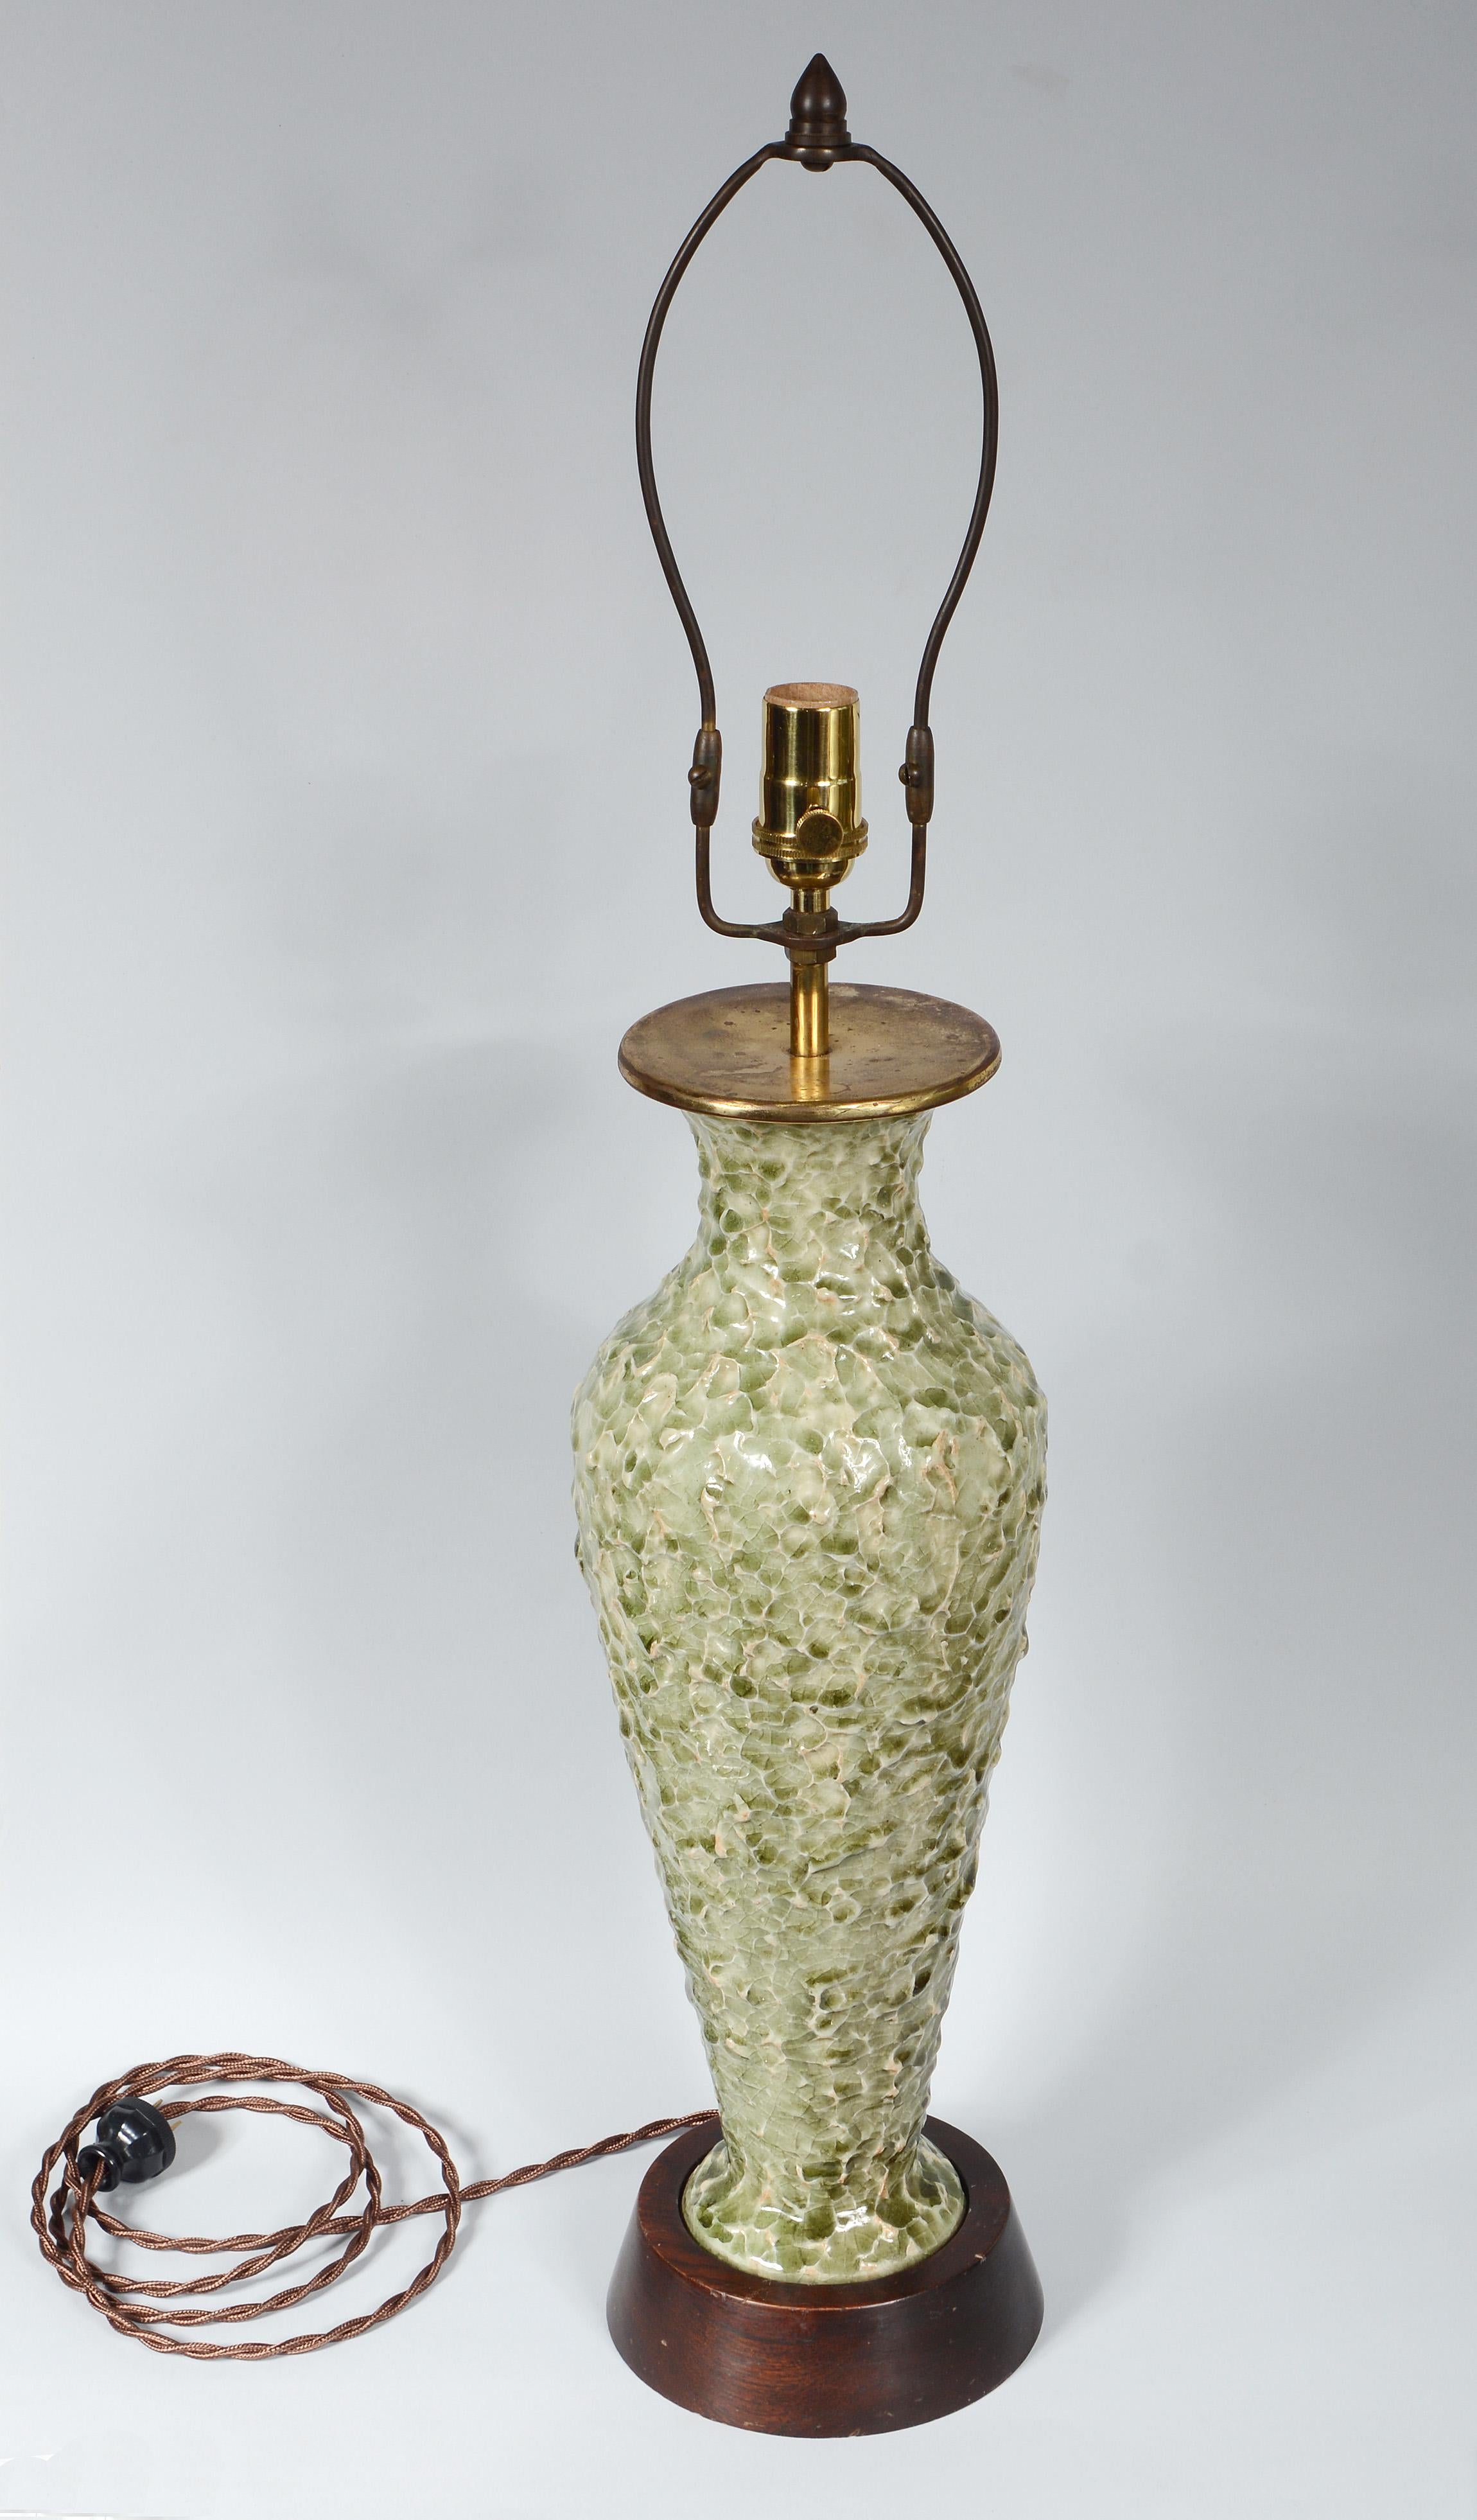 Table lamp produced by Thai Celadon in Bangkok. This lamp has an unusual textured surface. The lamp has been rewired and has a new three way socket. The base is mahogany. The lamp is 32 1/2